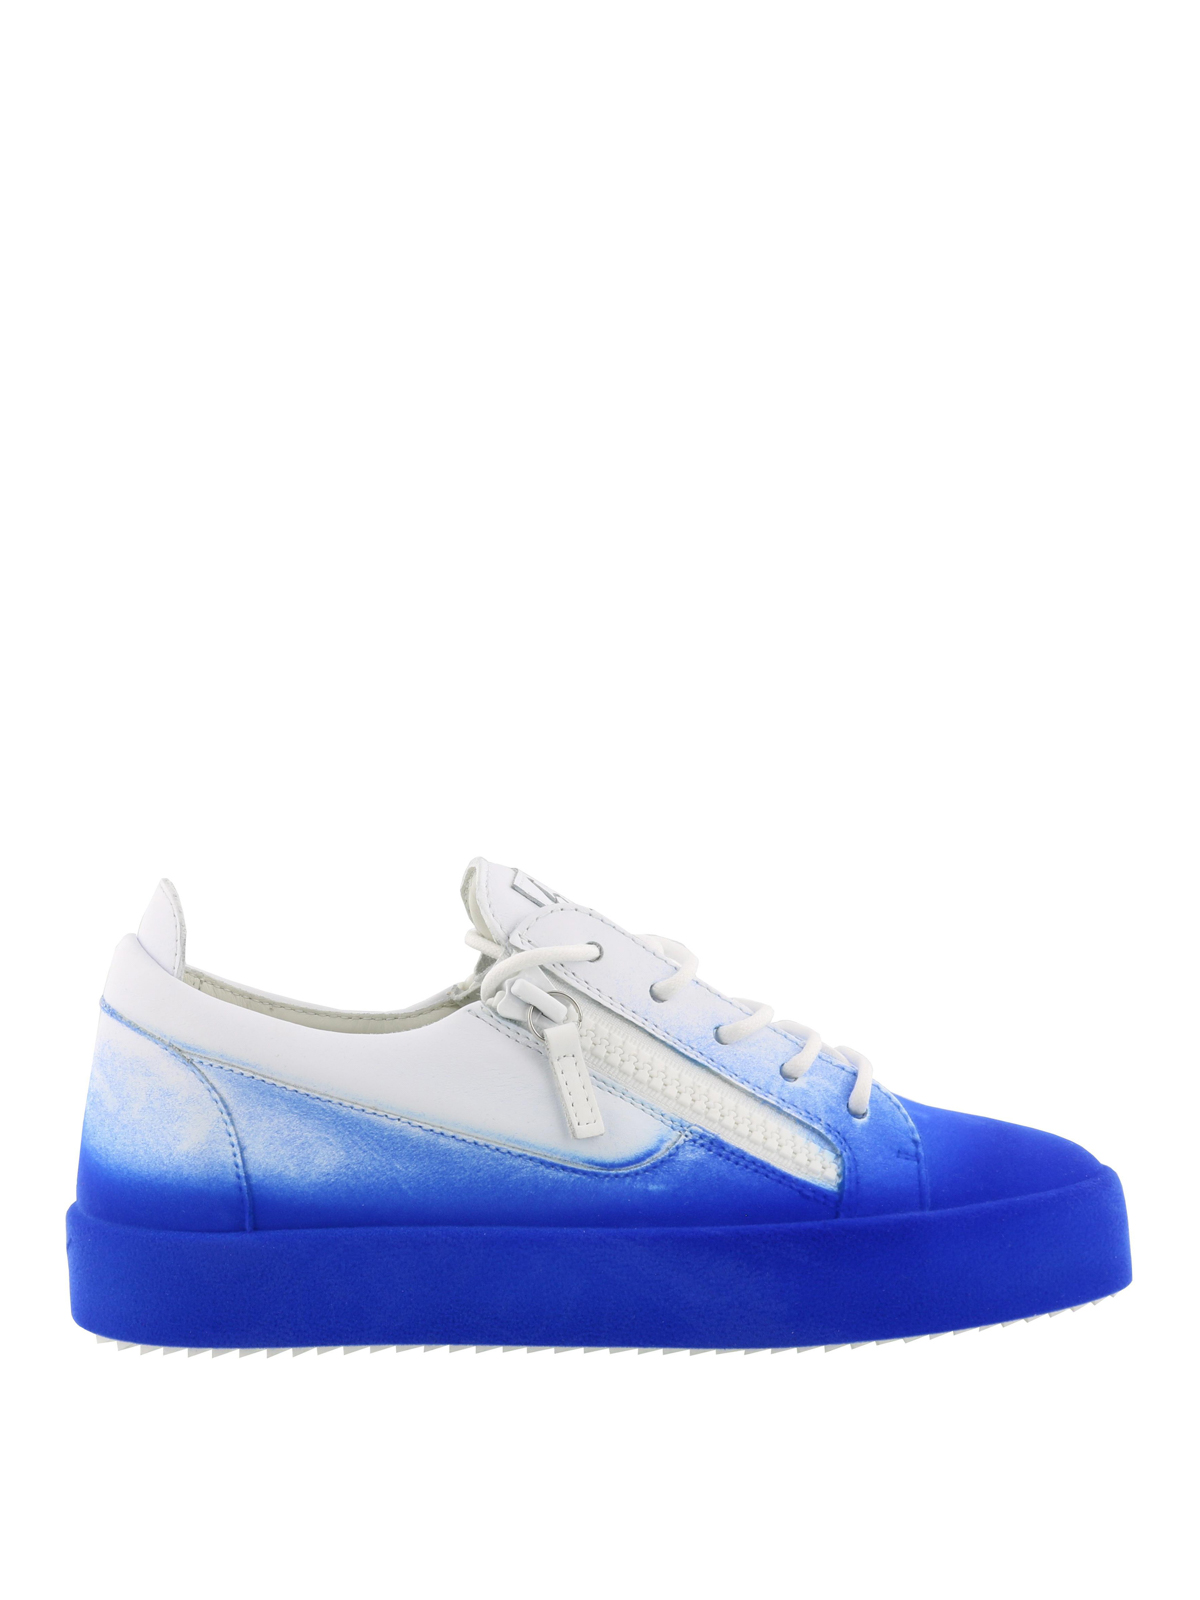 indsats Merchandising gentagelse Trainers Giuseppe Zanotti - New Unfinished blue coated sneakers - RM80010003